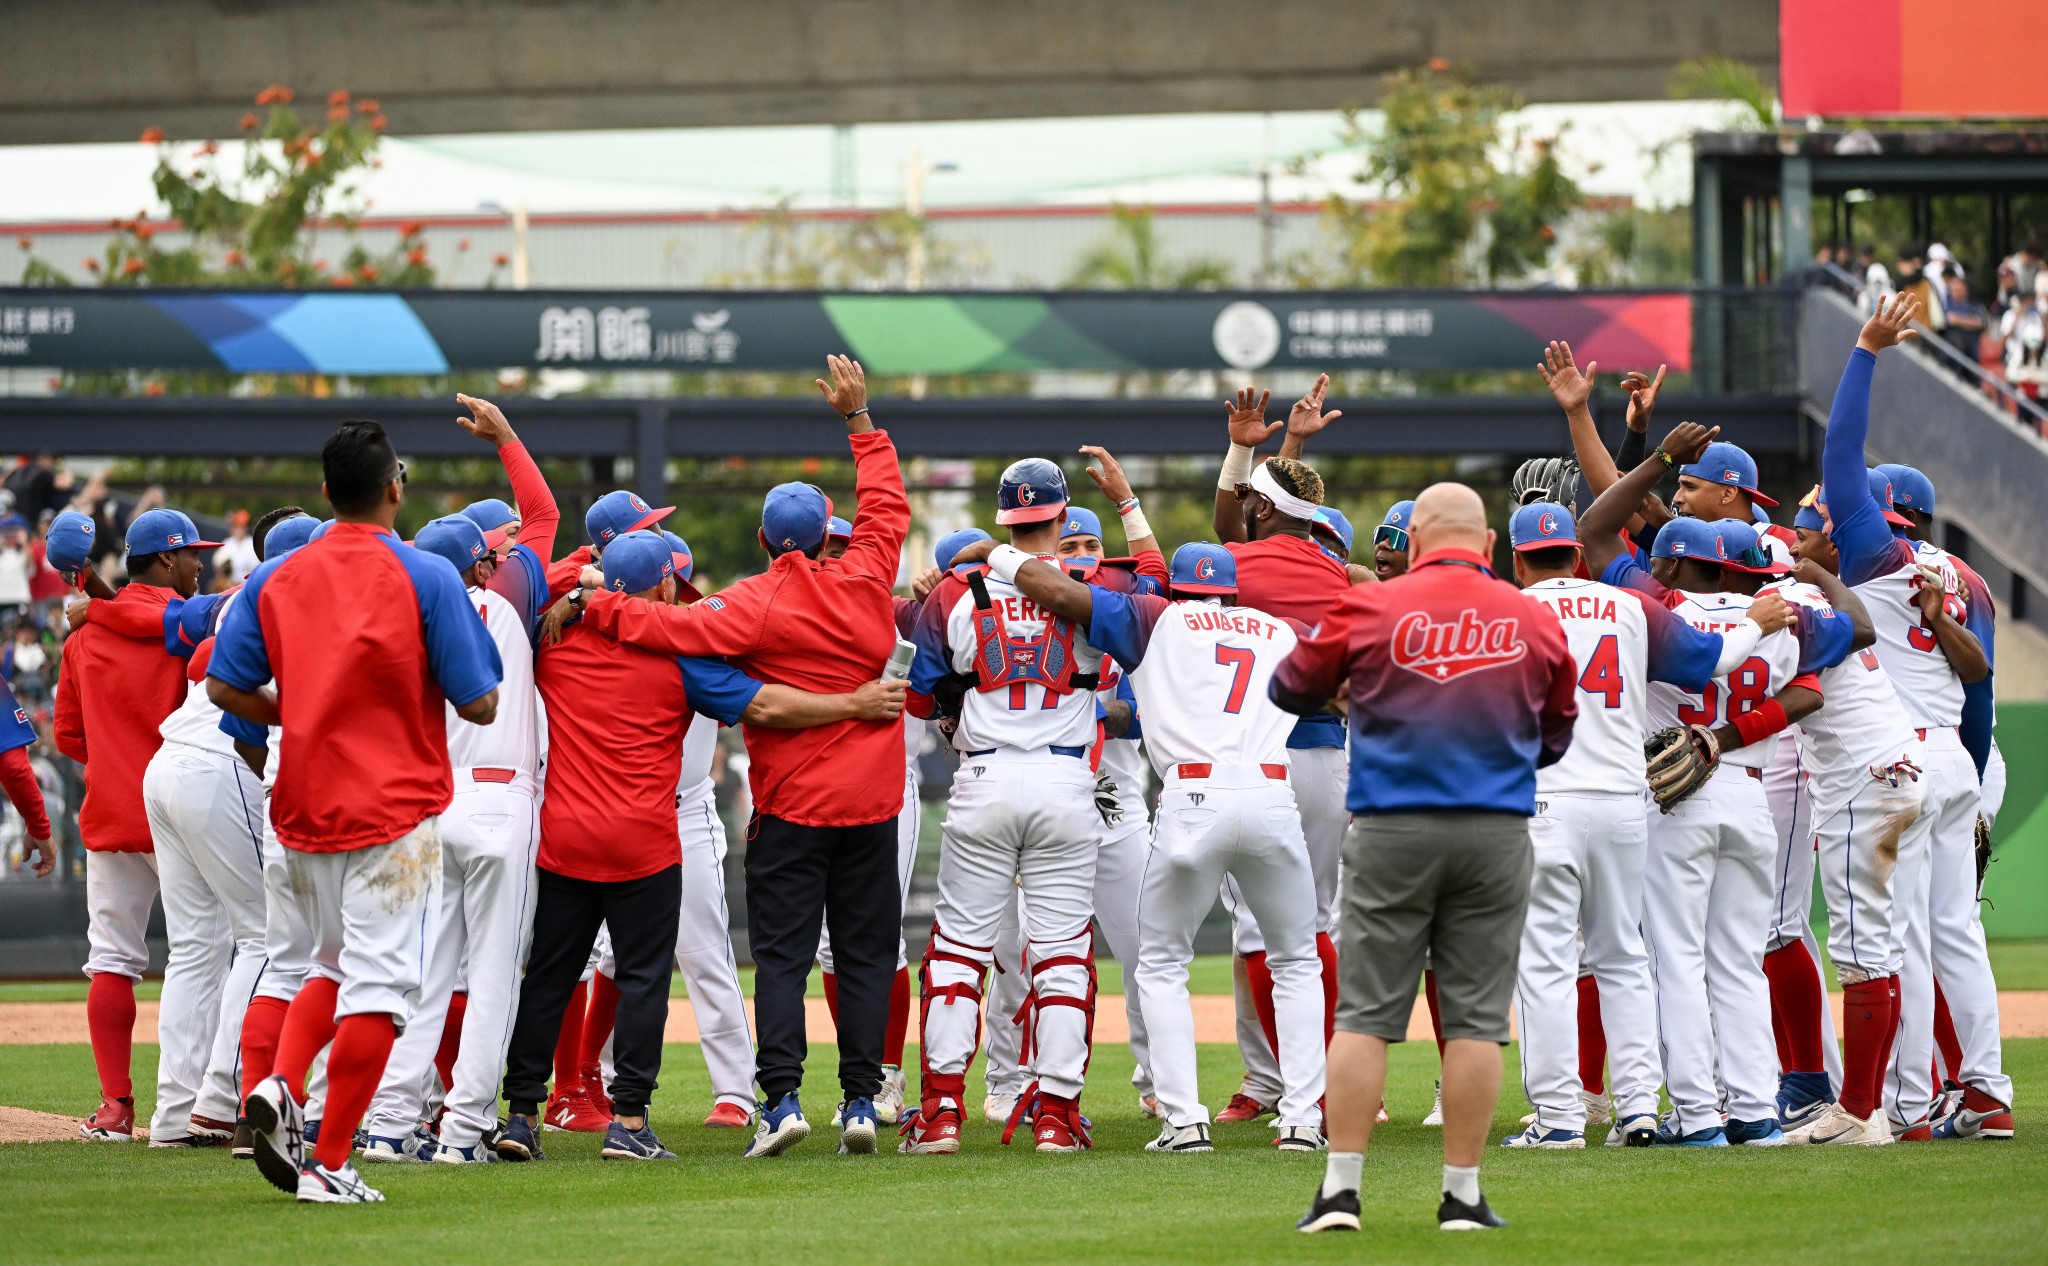 Cuba and Italy progress in incredible five-way tie at World Baseball Classic